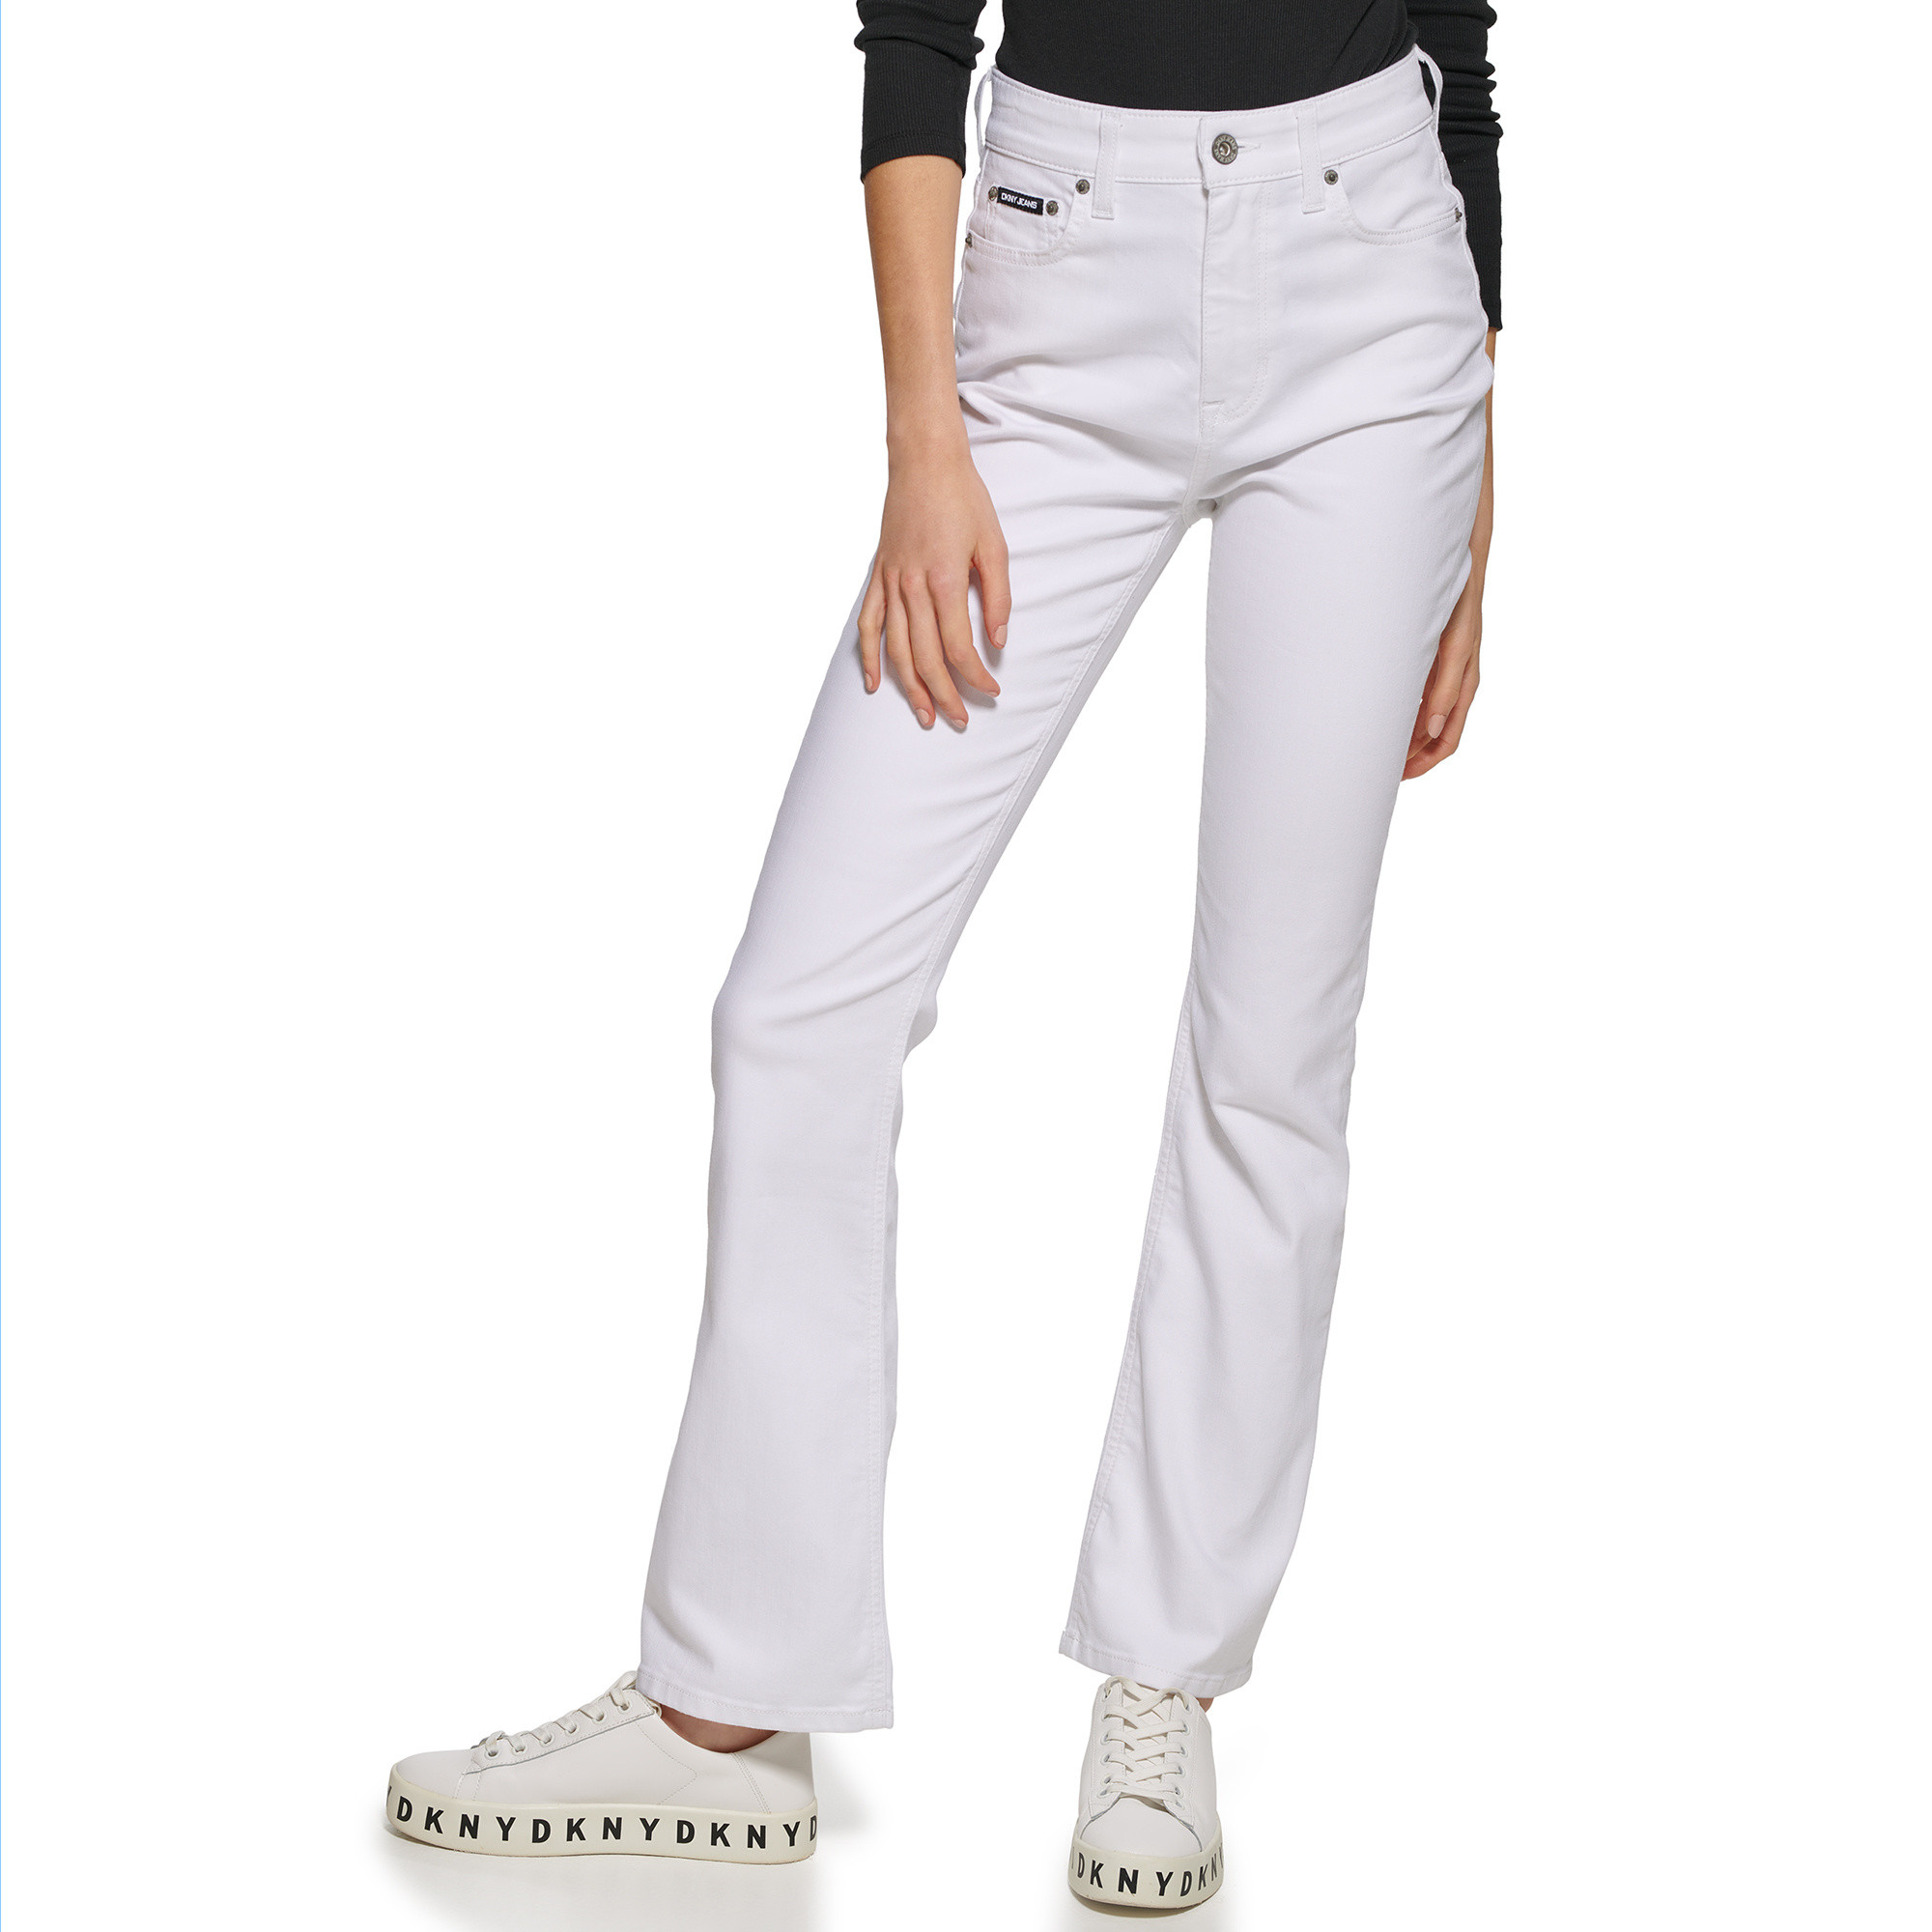 DKNY - High waist flaire jeans, White, large image number 2